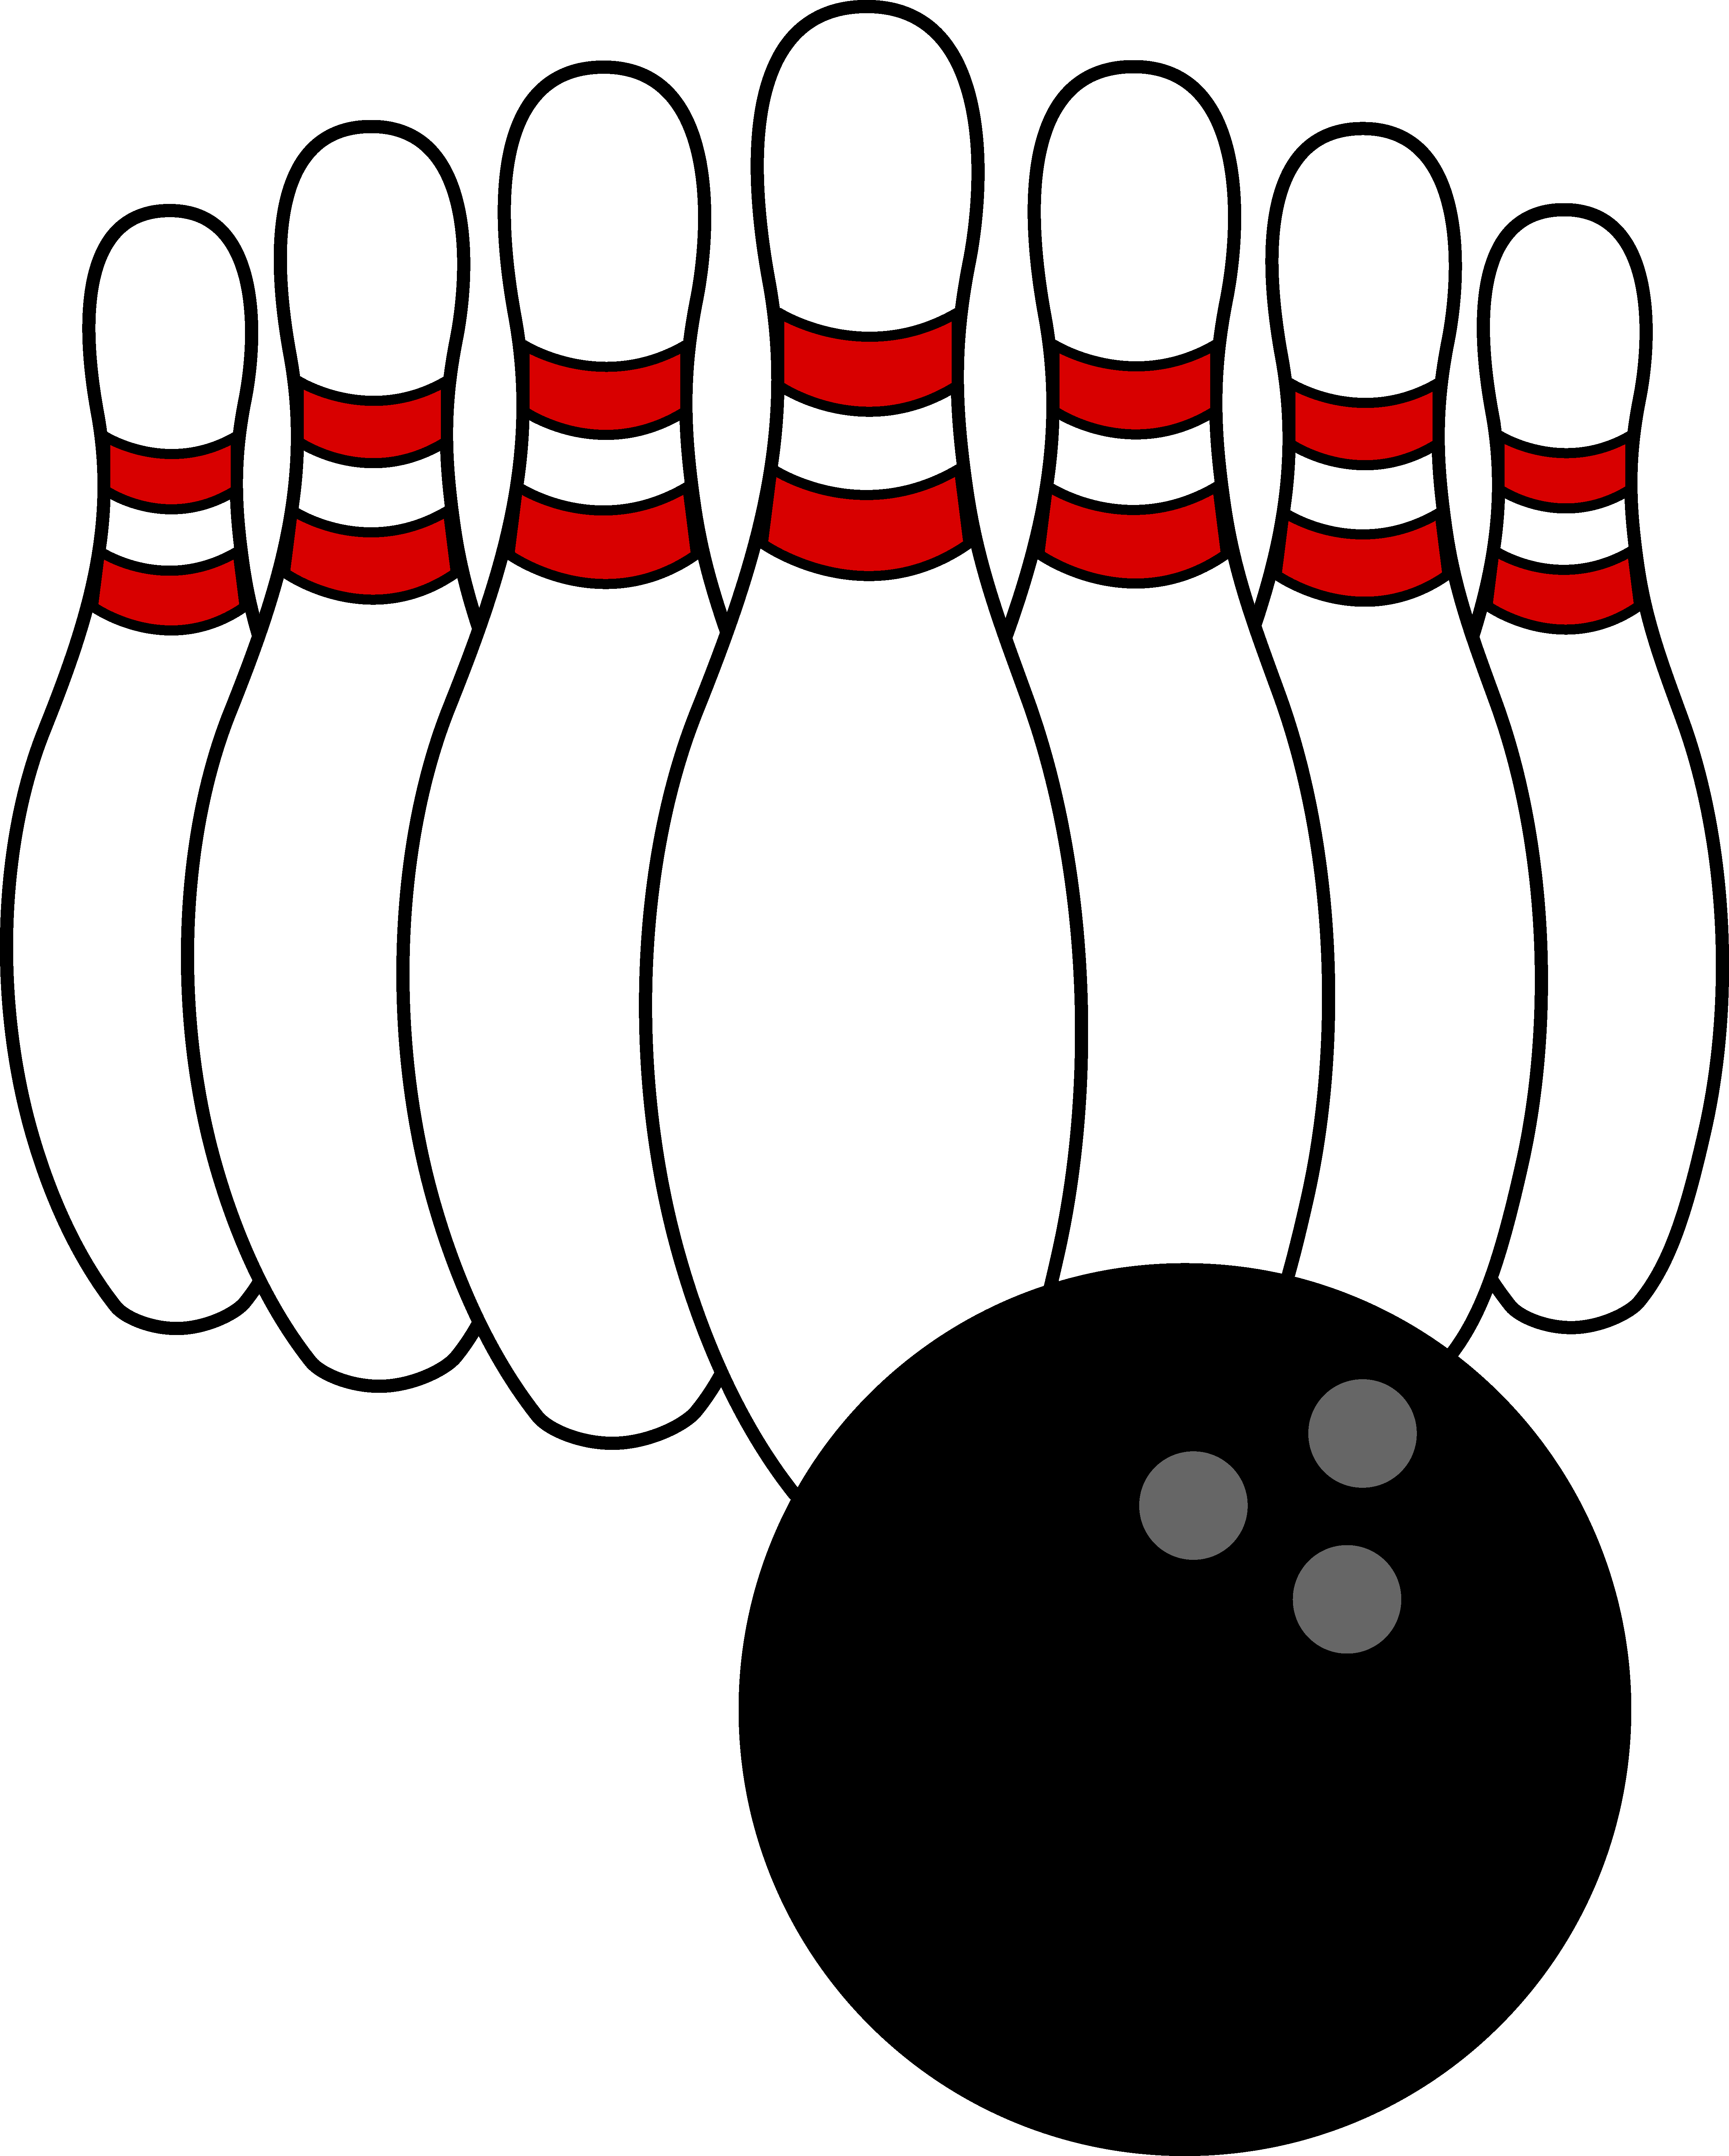 Bowling clipart free download clip art on